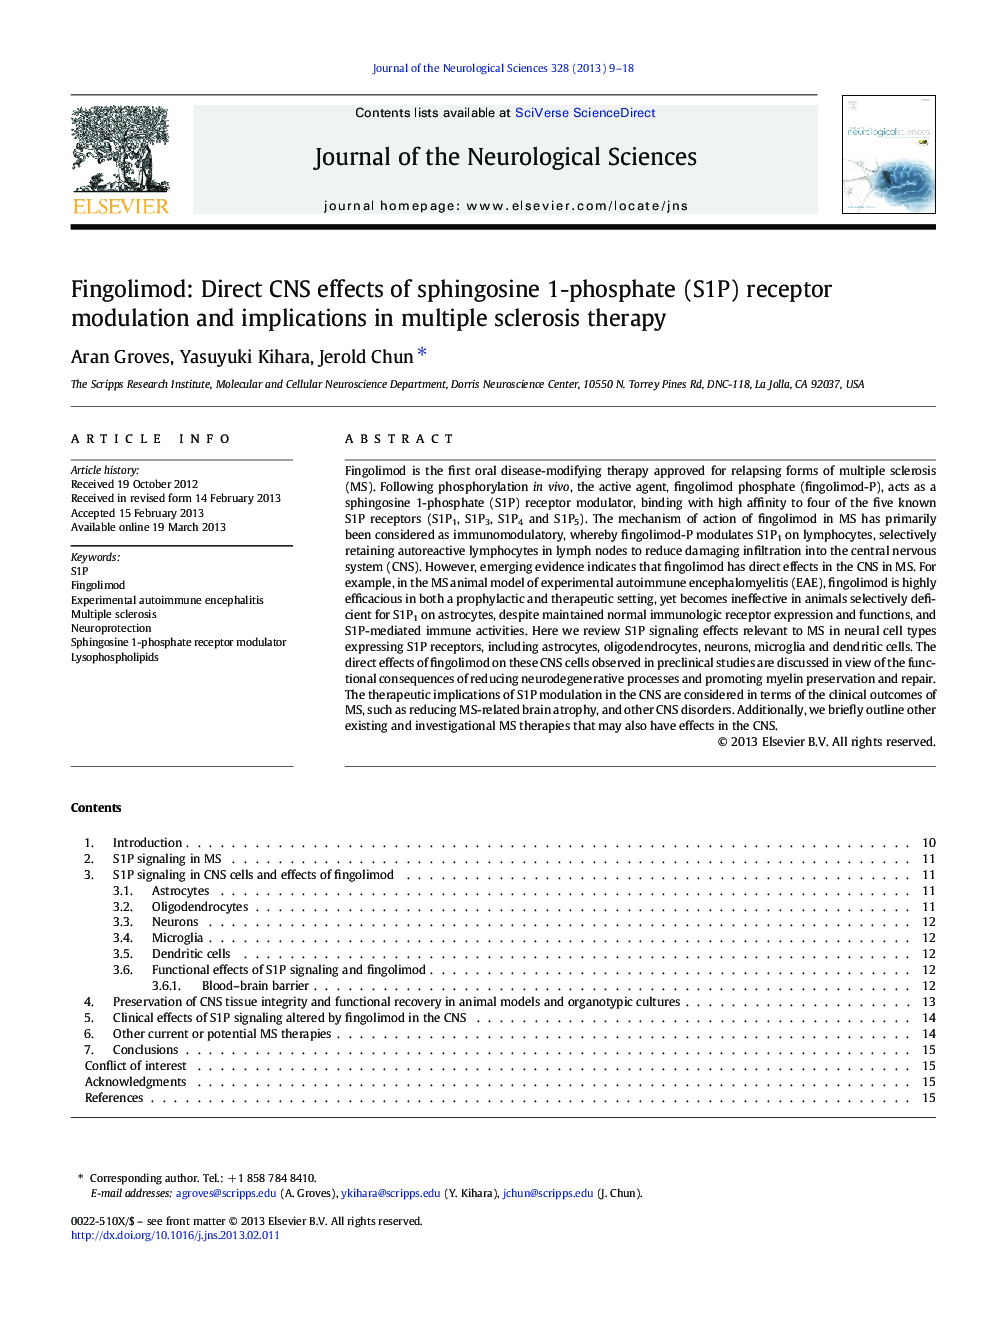 Fingolimod: Direct CNS effects of sphingosine 1-phosphate (S1P) receptor modulation and implications in multiple sclerosis therapy